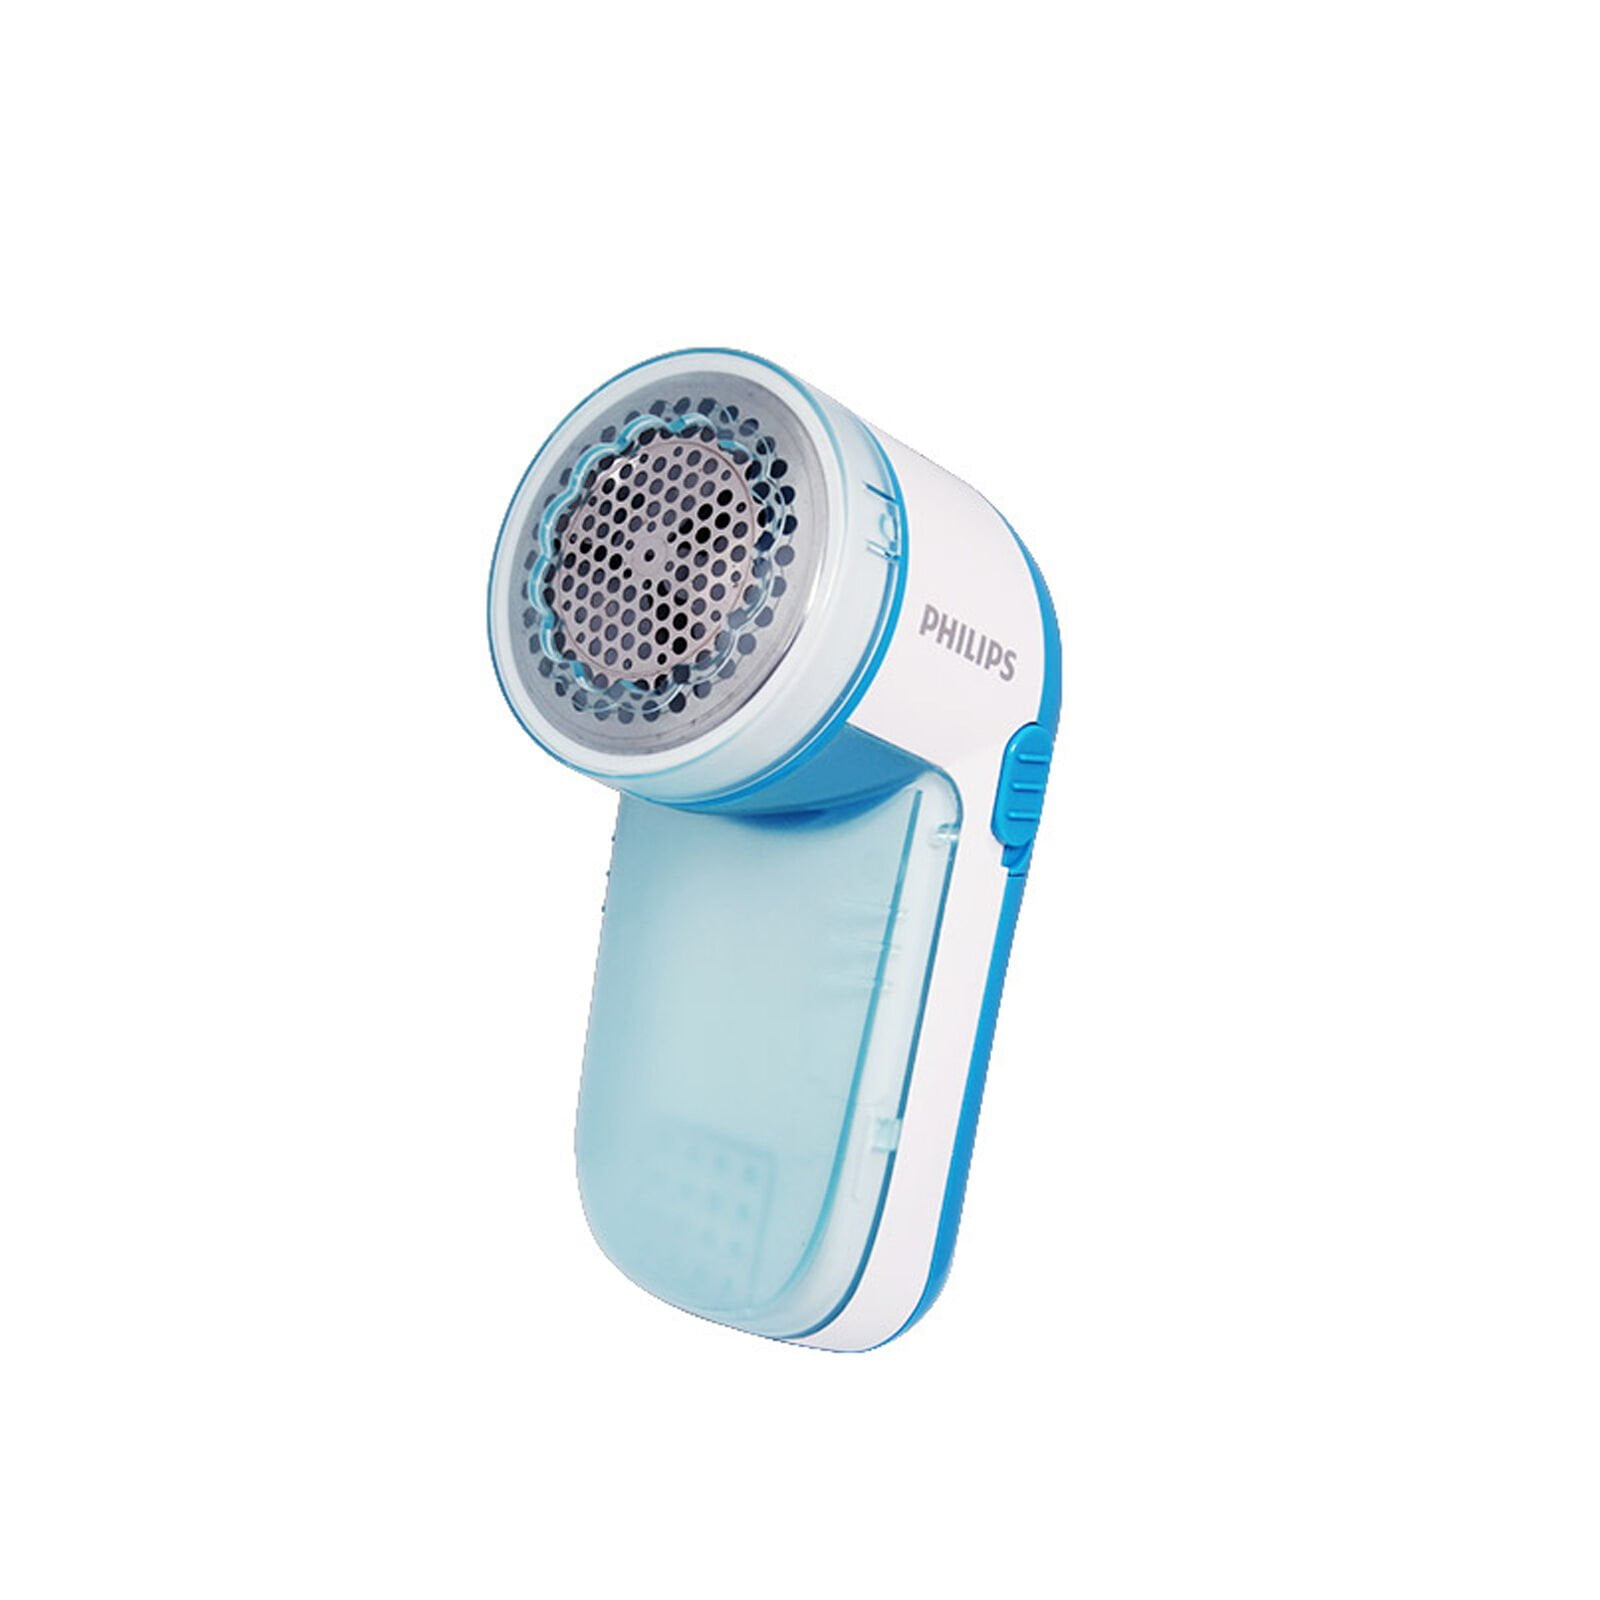  Philips Fabric Shaver, Removes Fabric Pills, Suitable for All  Garments, Large Blade Surface, Cleaning Brush, Includes Batteries, Blue  (GC026/00) : Health & Household